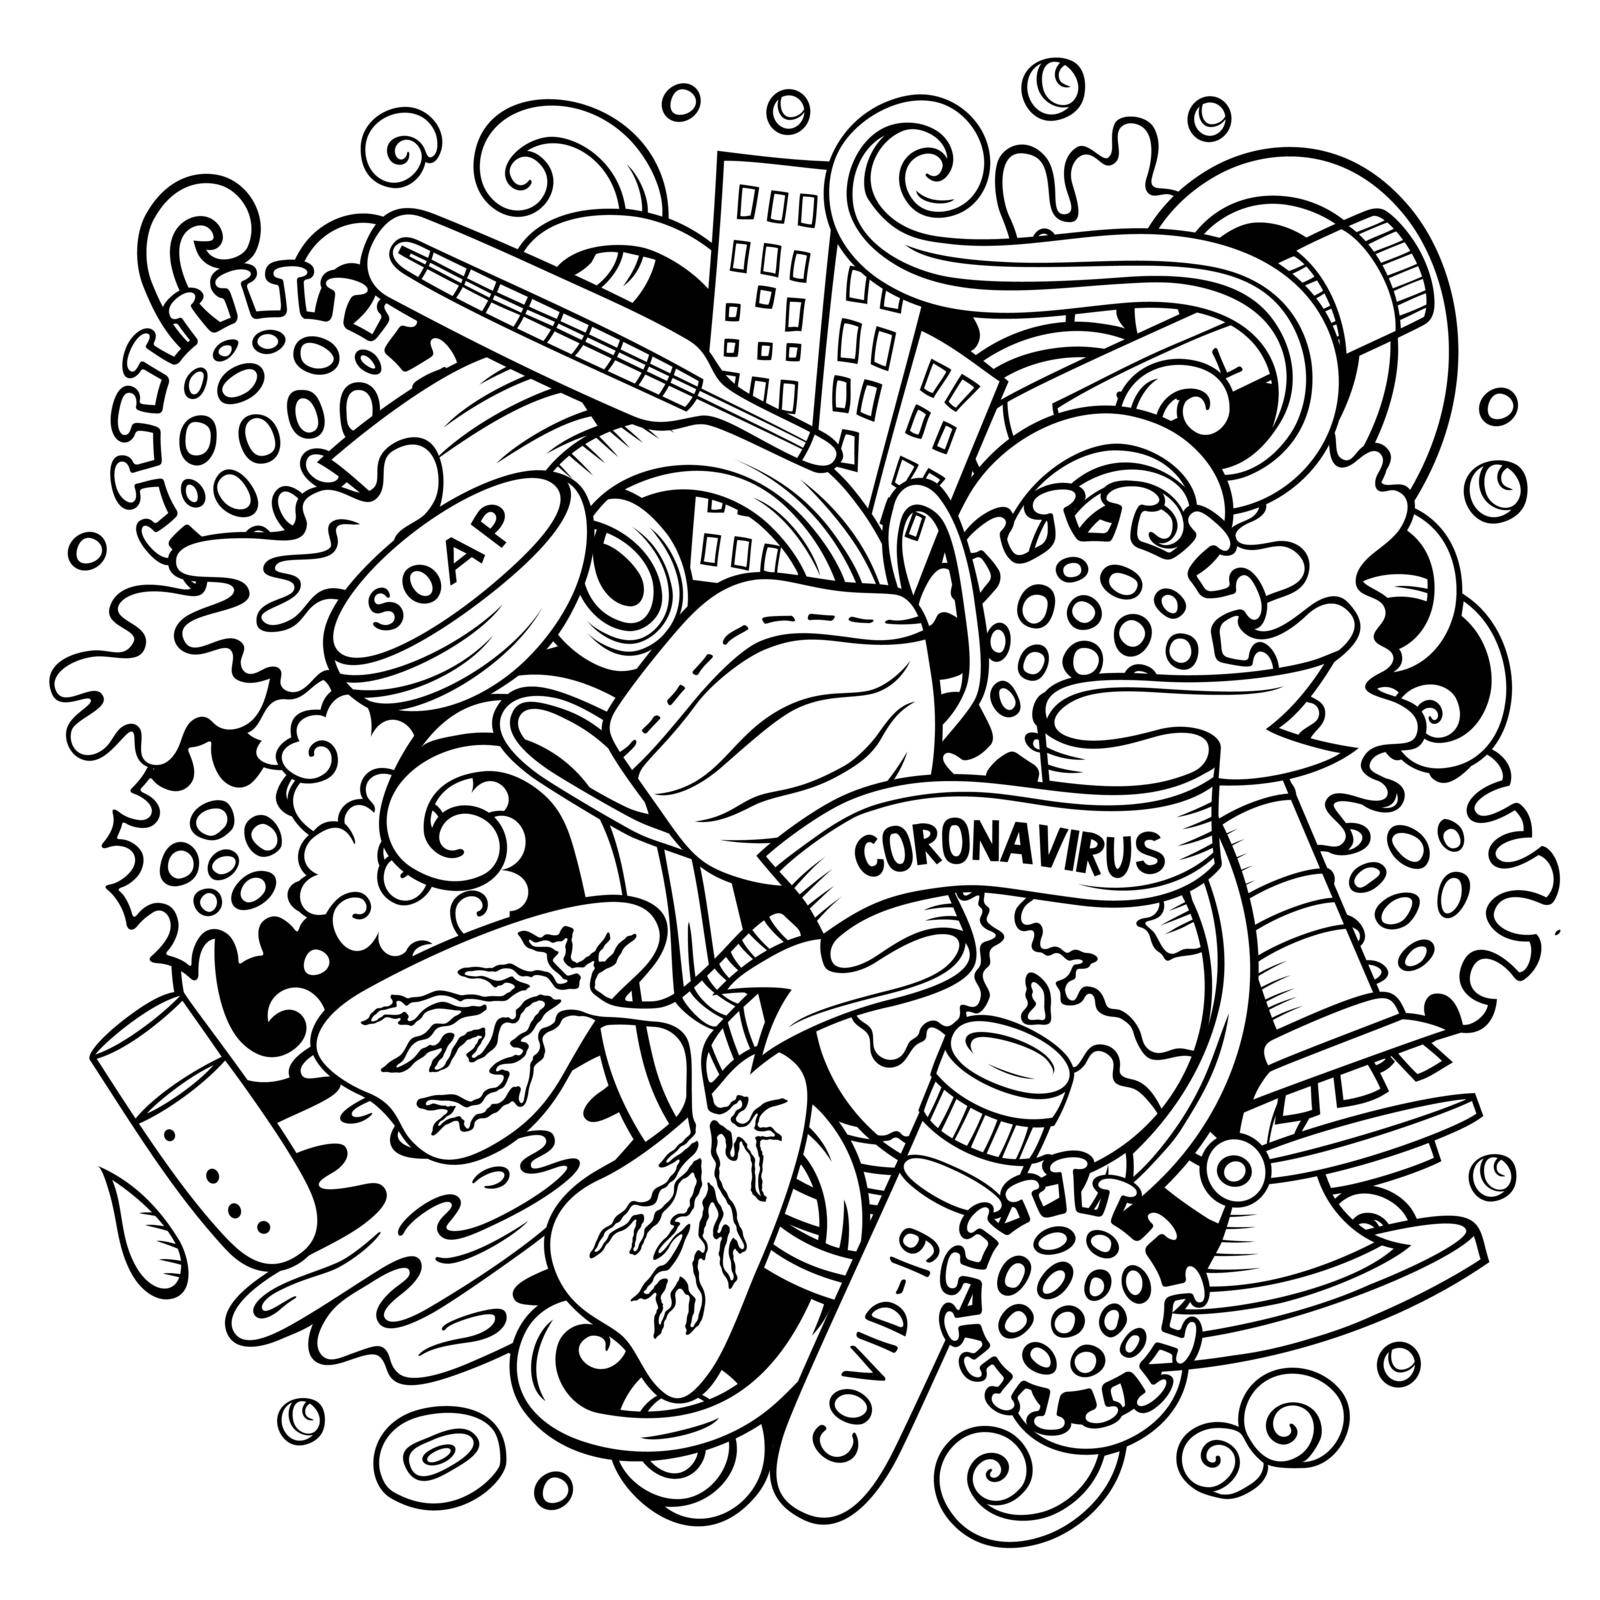 Cartoon vector doodles Coronavirus illustration. Sketchy, detailed, with lots of objects background. All objects separate. Line art epidemic picture